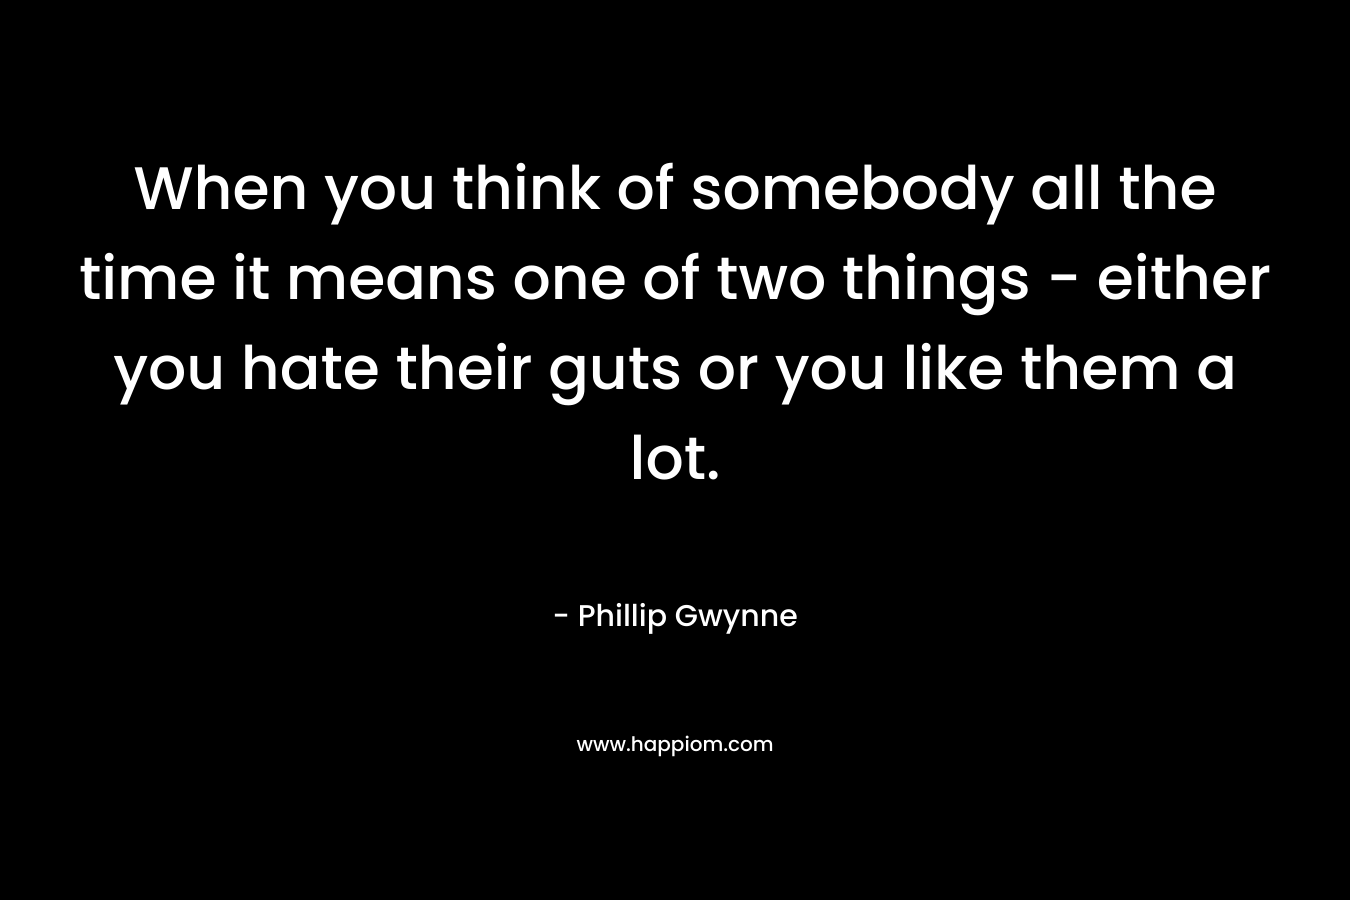 When you think of somebody all the time it means one of two things – either you hate their guts or you like them a lot. – Phillip Gwynne